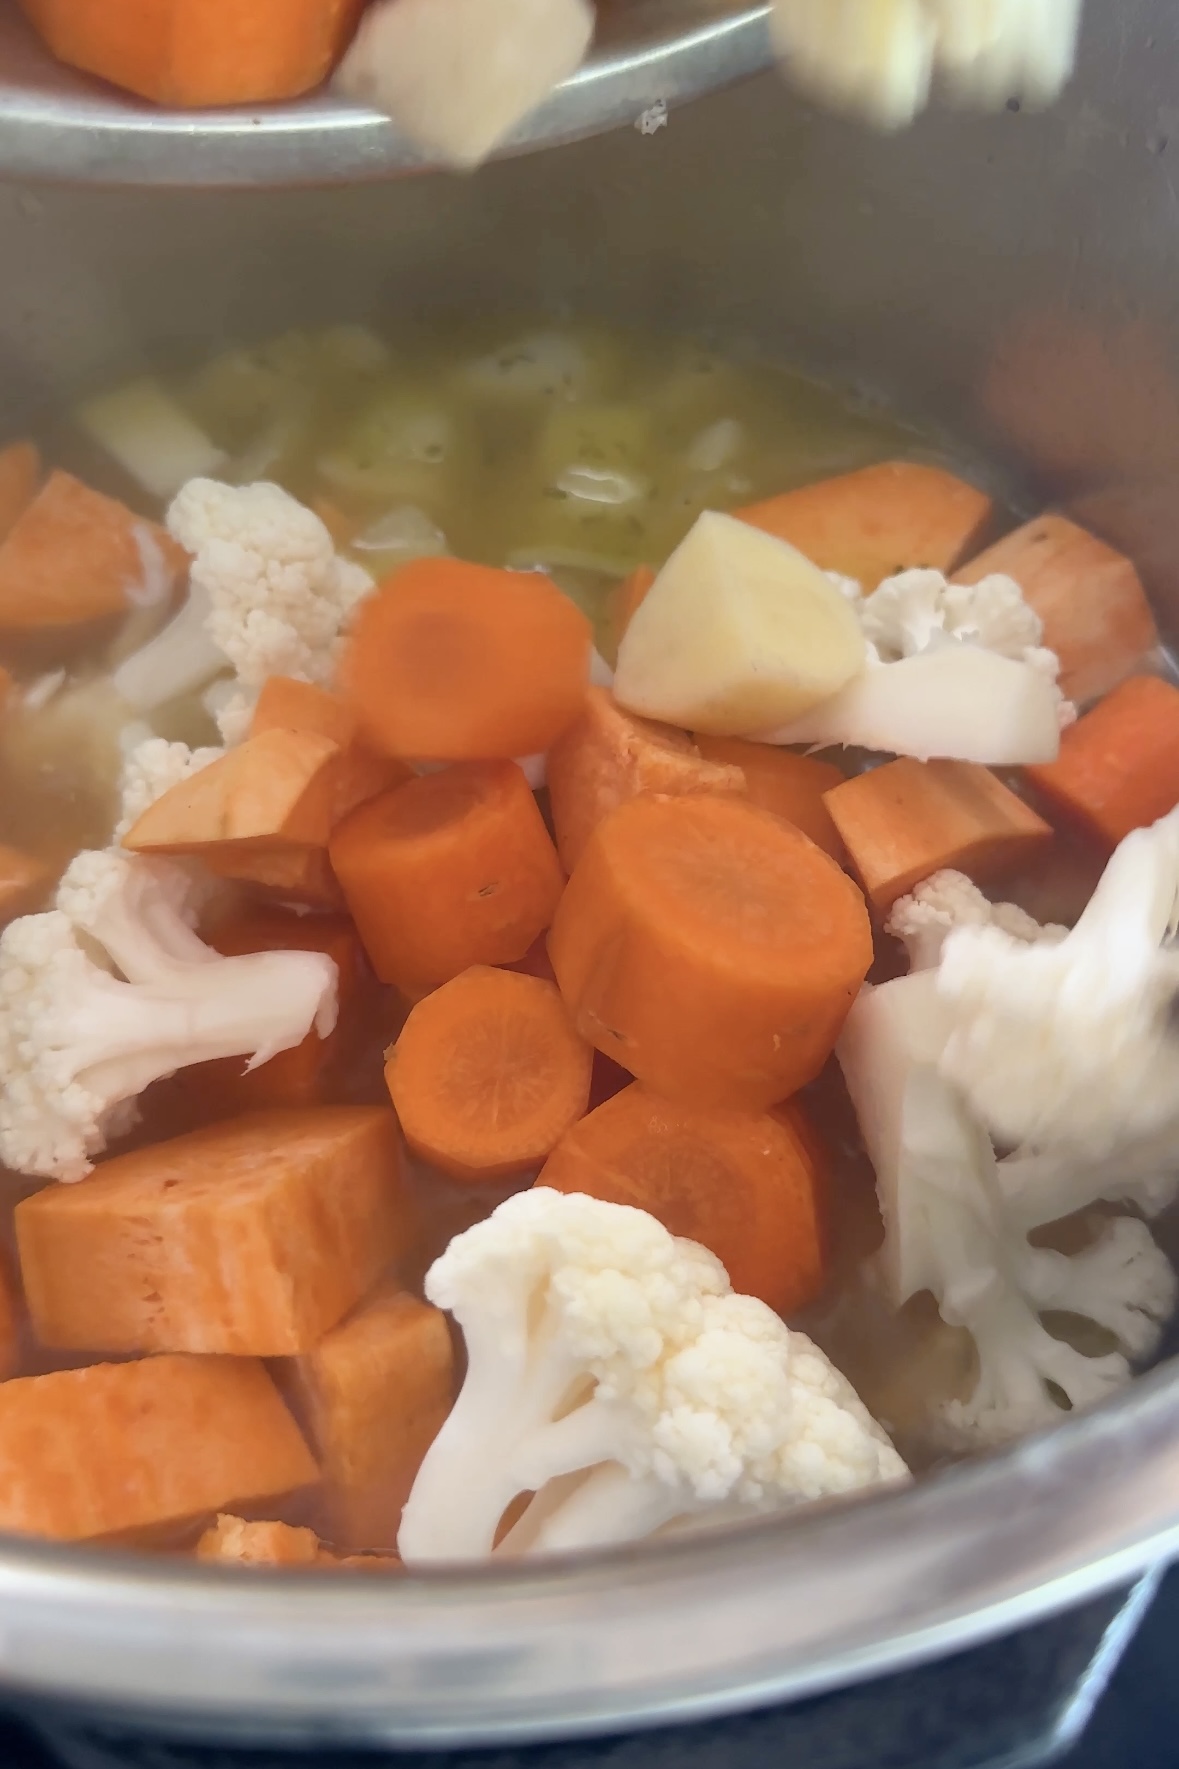 Chopped vegetables are added to an instant pot.